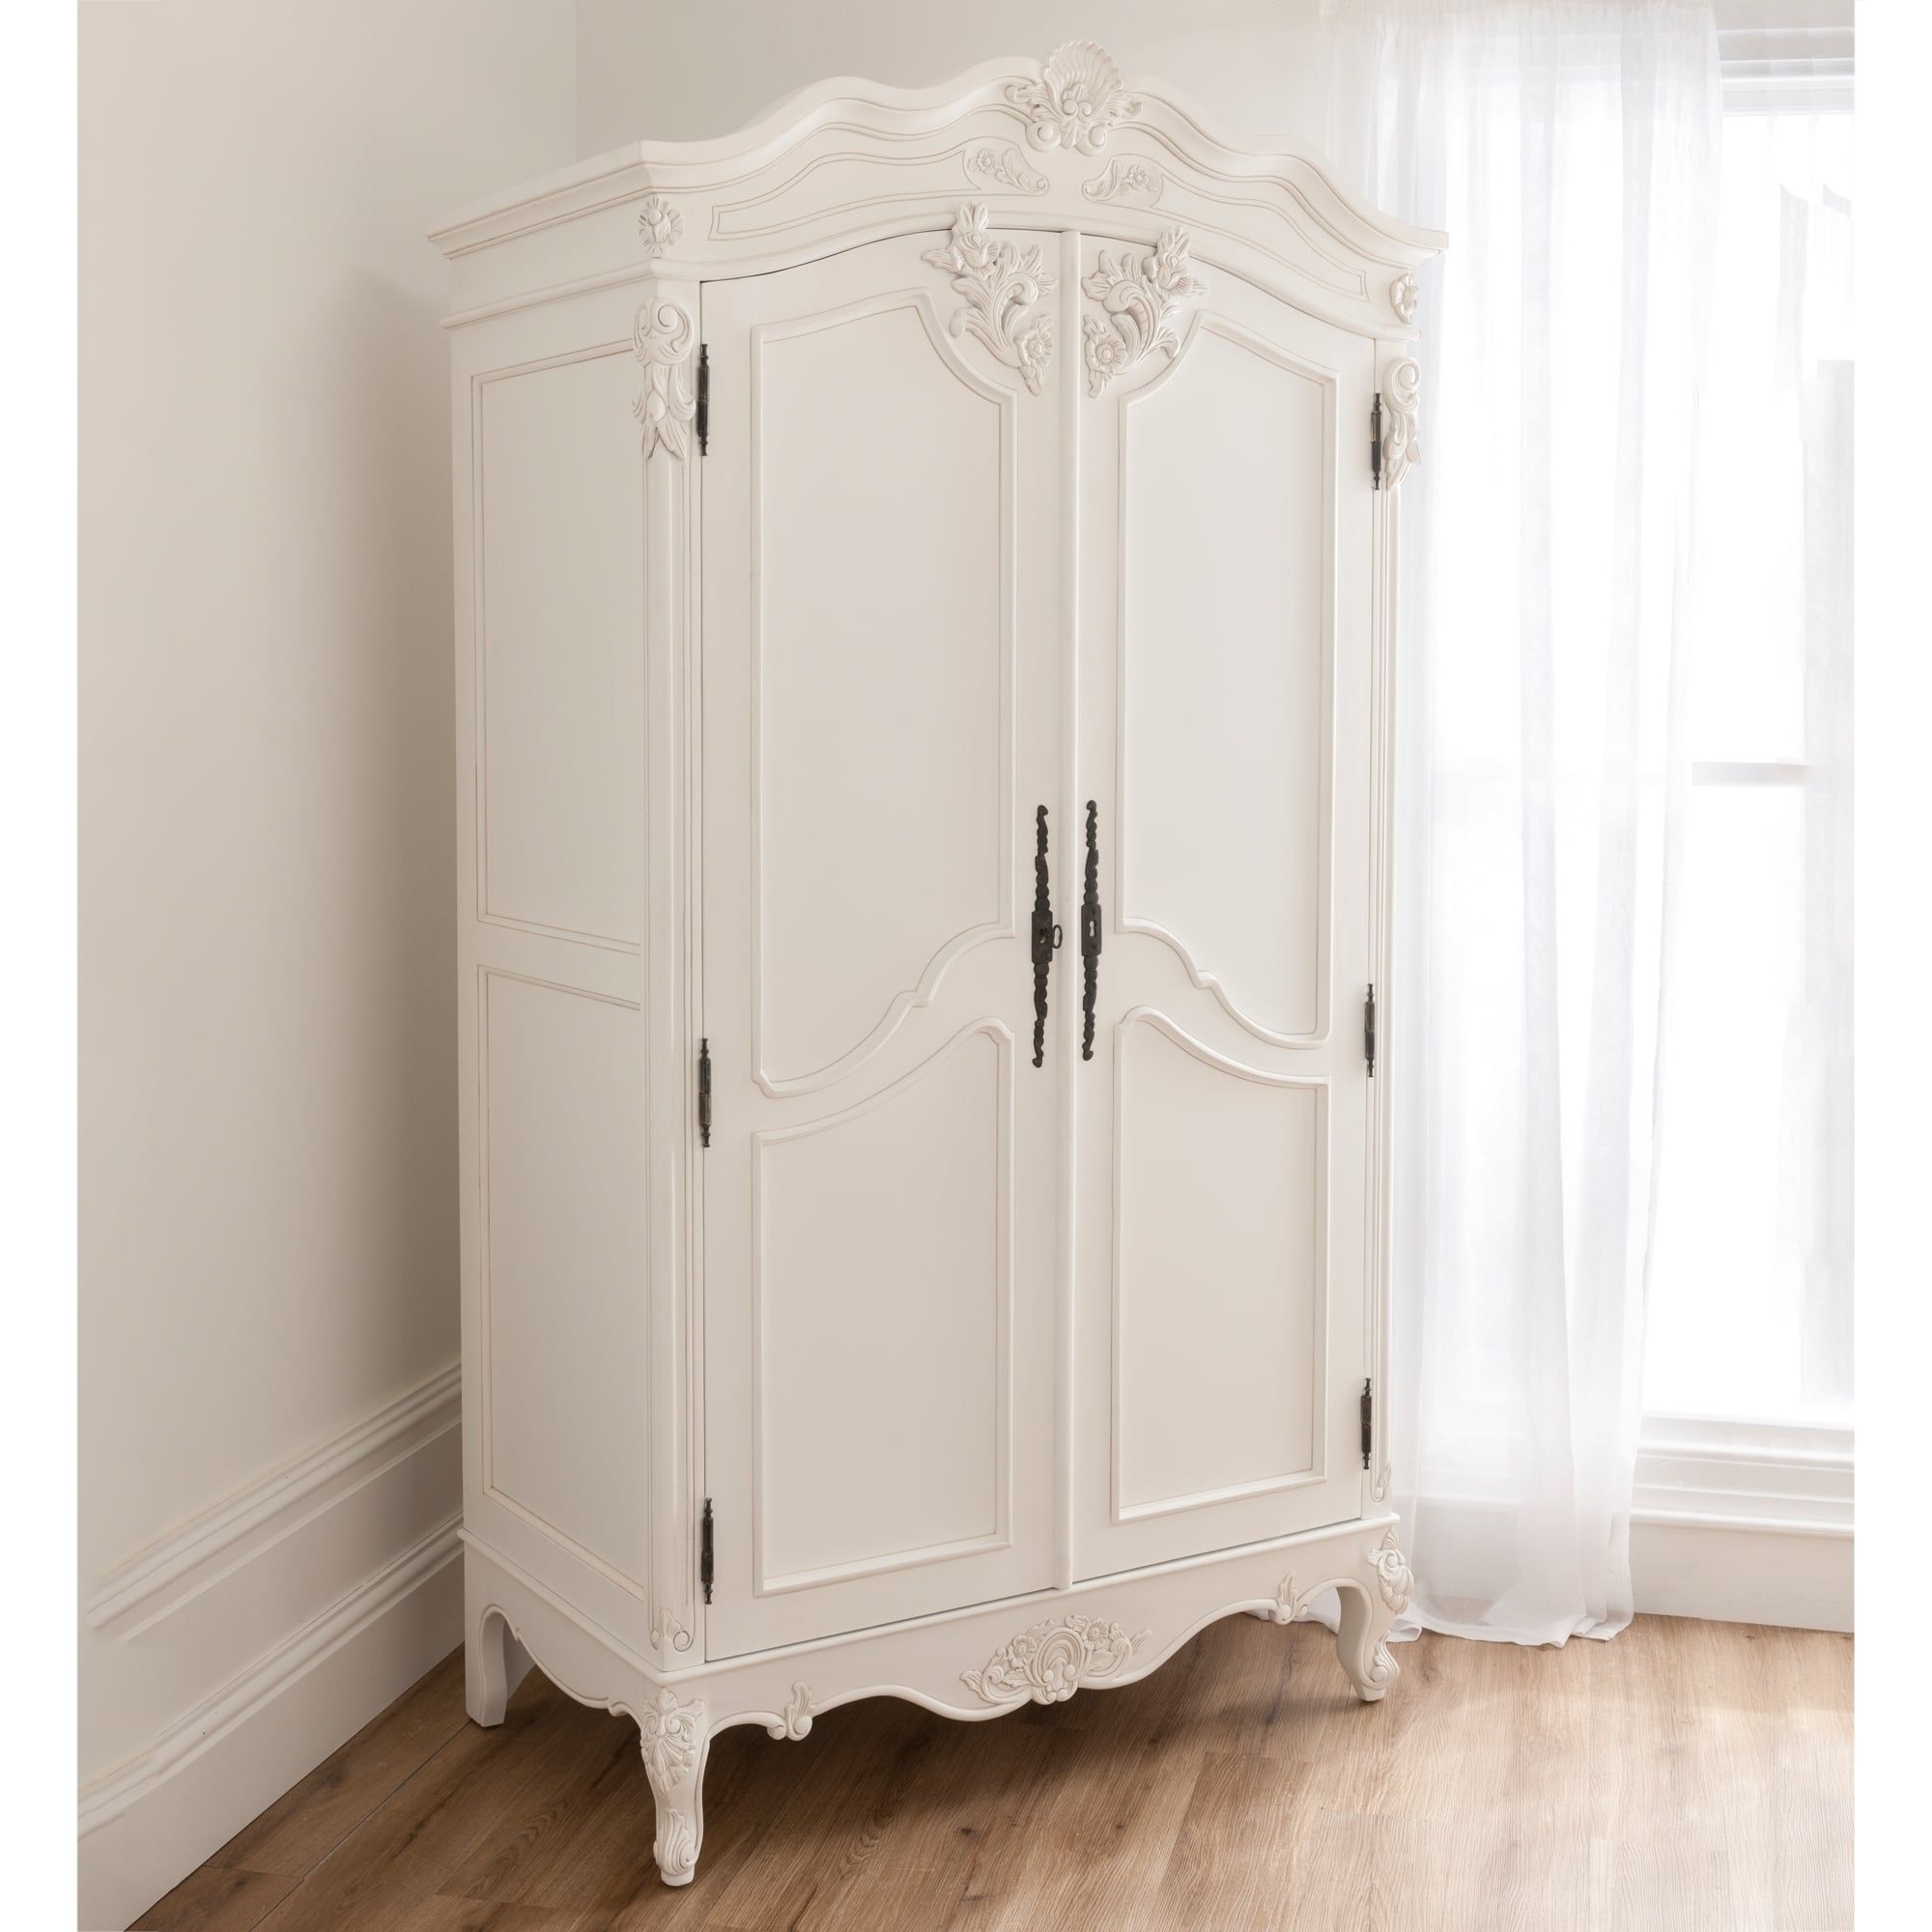 French Style Armoires Wardrobes Within Most Current Baroque Antique French Wardrobe Is Available Online From (View 4 of 15)